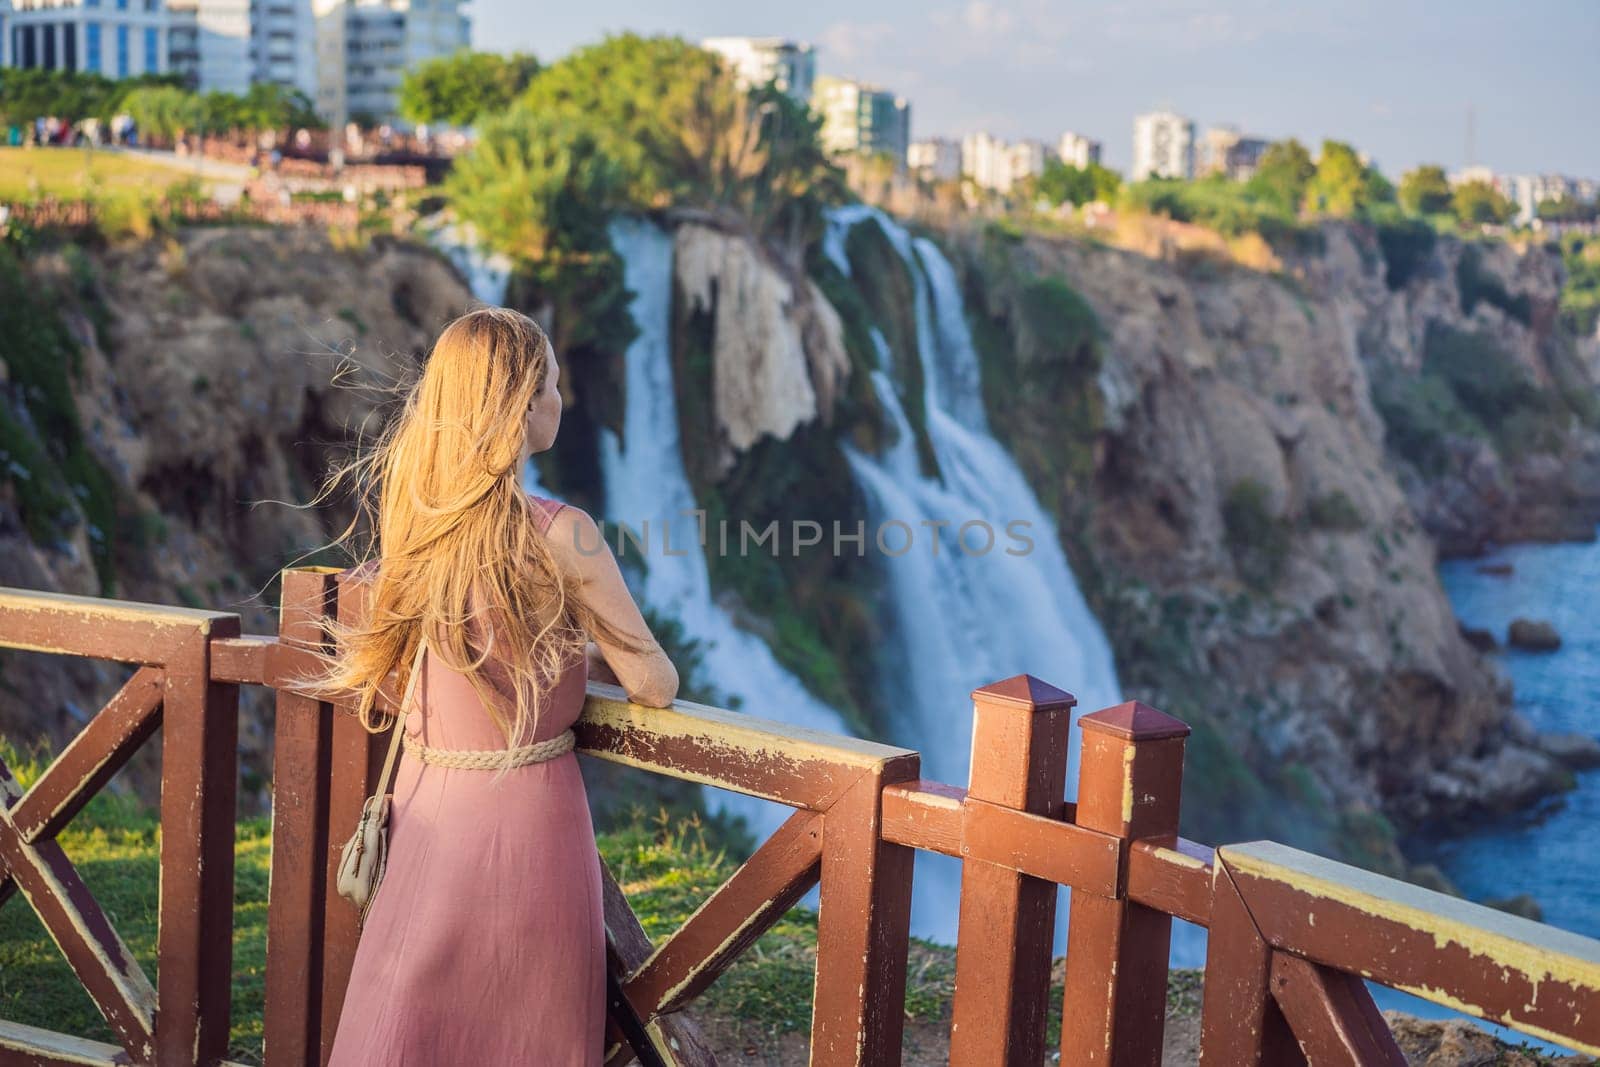 Beautiful woman with long hair on the background of Duden waterfall in Antalya. Famous places of Turkey. Lower Duden Falls drop off a rocky cliff falling from about 40 m into the Mediterranean Sea in amazing water clouds. Tourism and travel destination photo in Antalya, Turkey. Turkiye by galitskaya